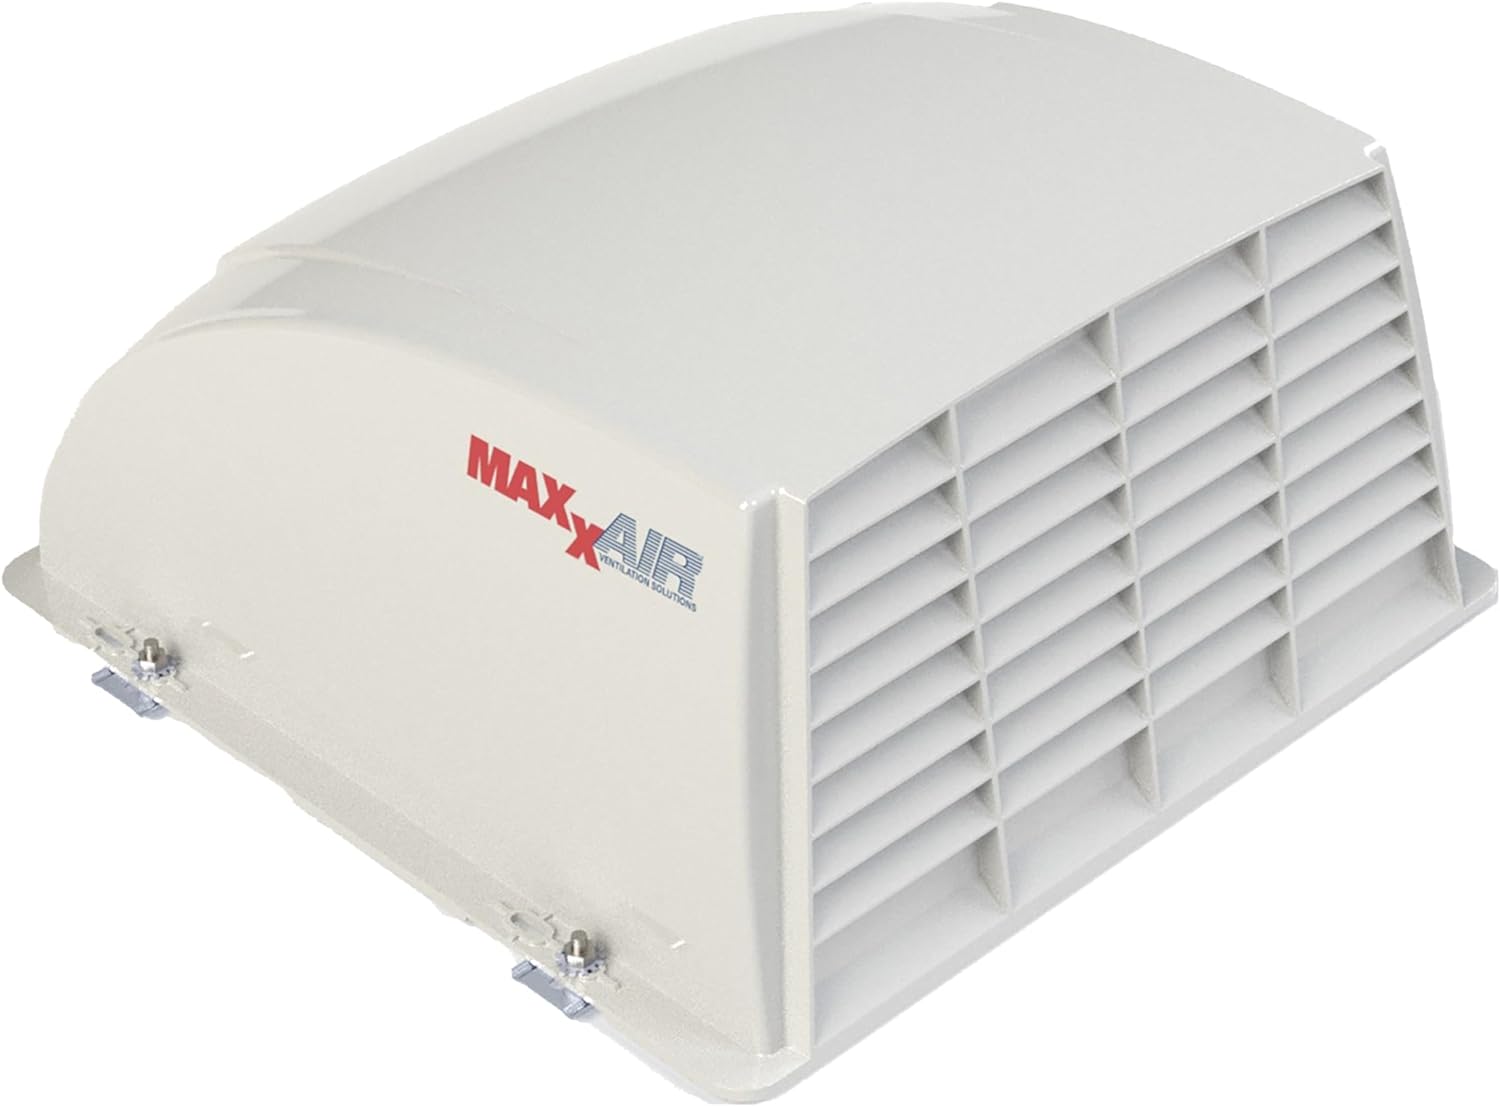 Maxx Air I+ Vent Corp 00933051 RV Roof Vent Cover - Translucent White